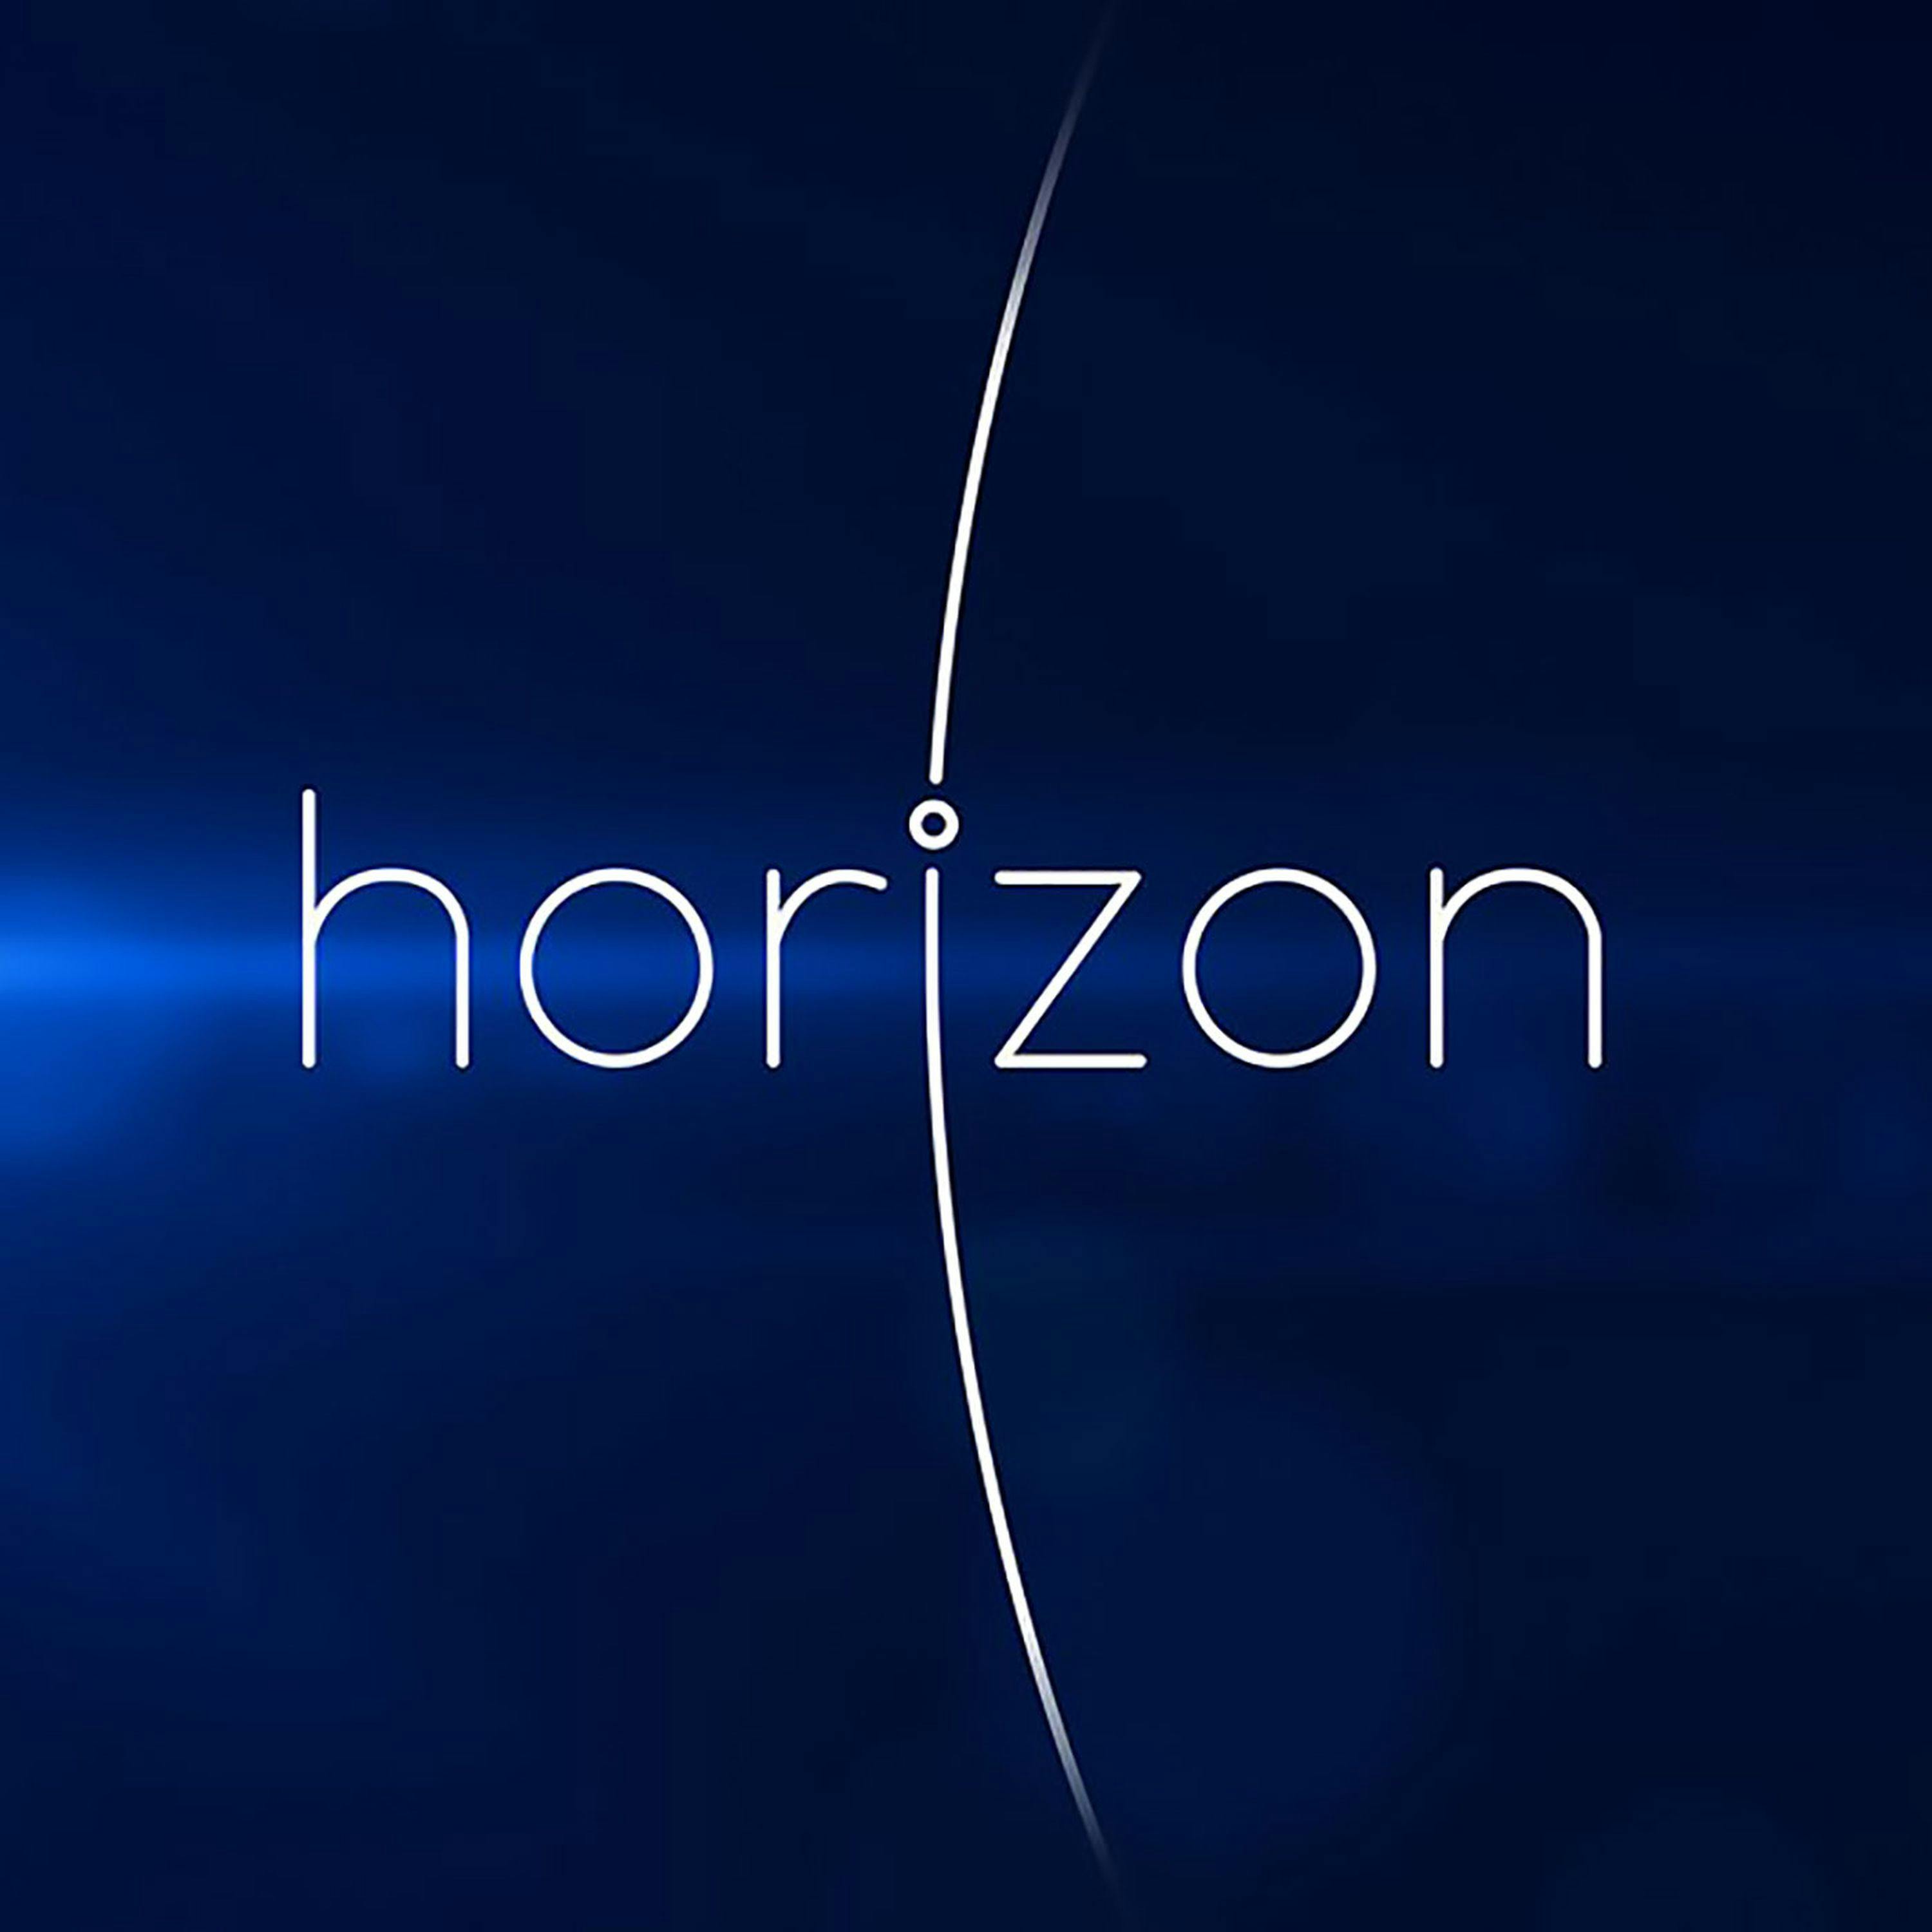 The story of the BBC’s Horizon programme